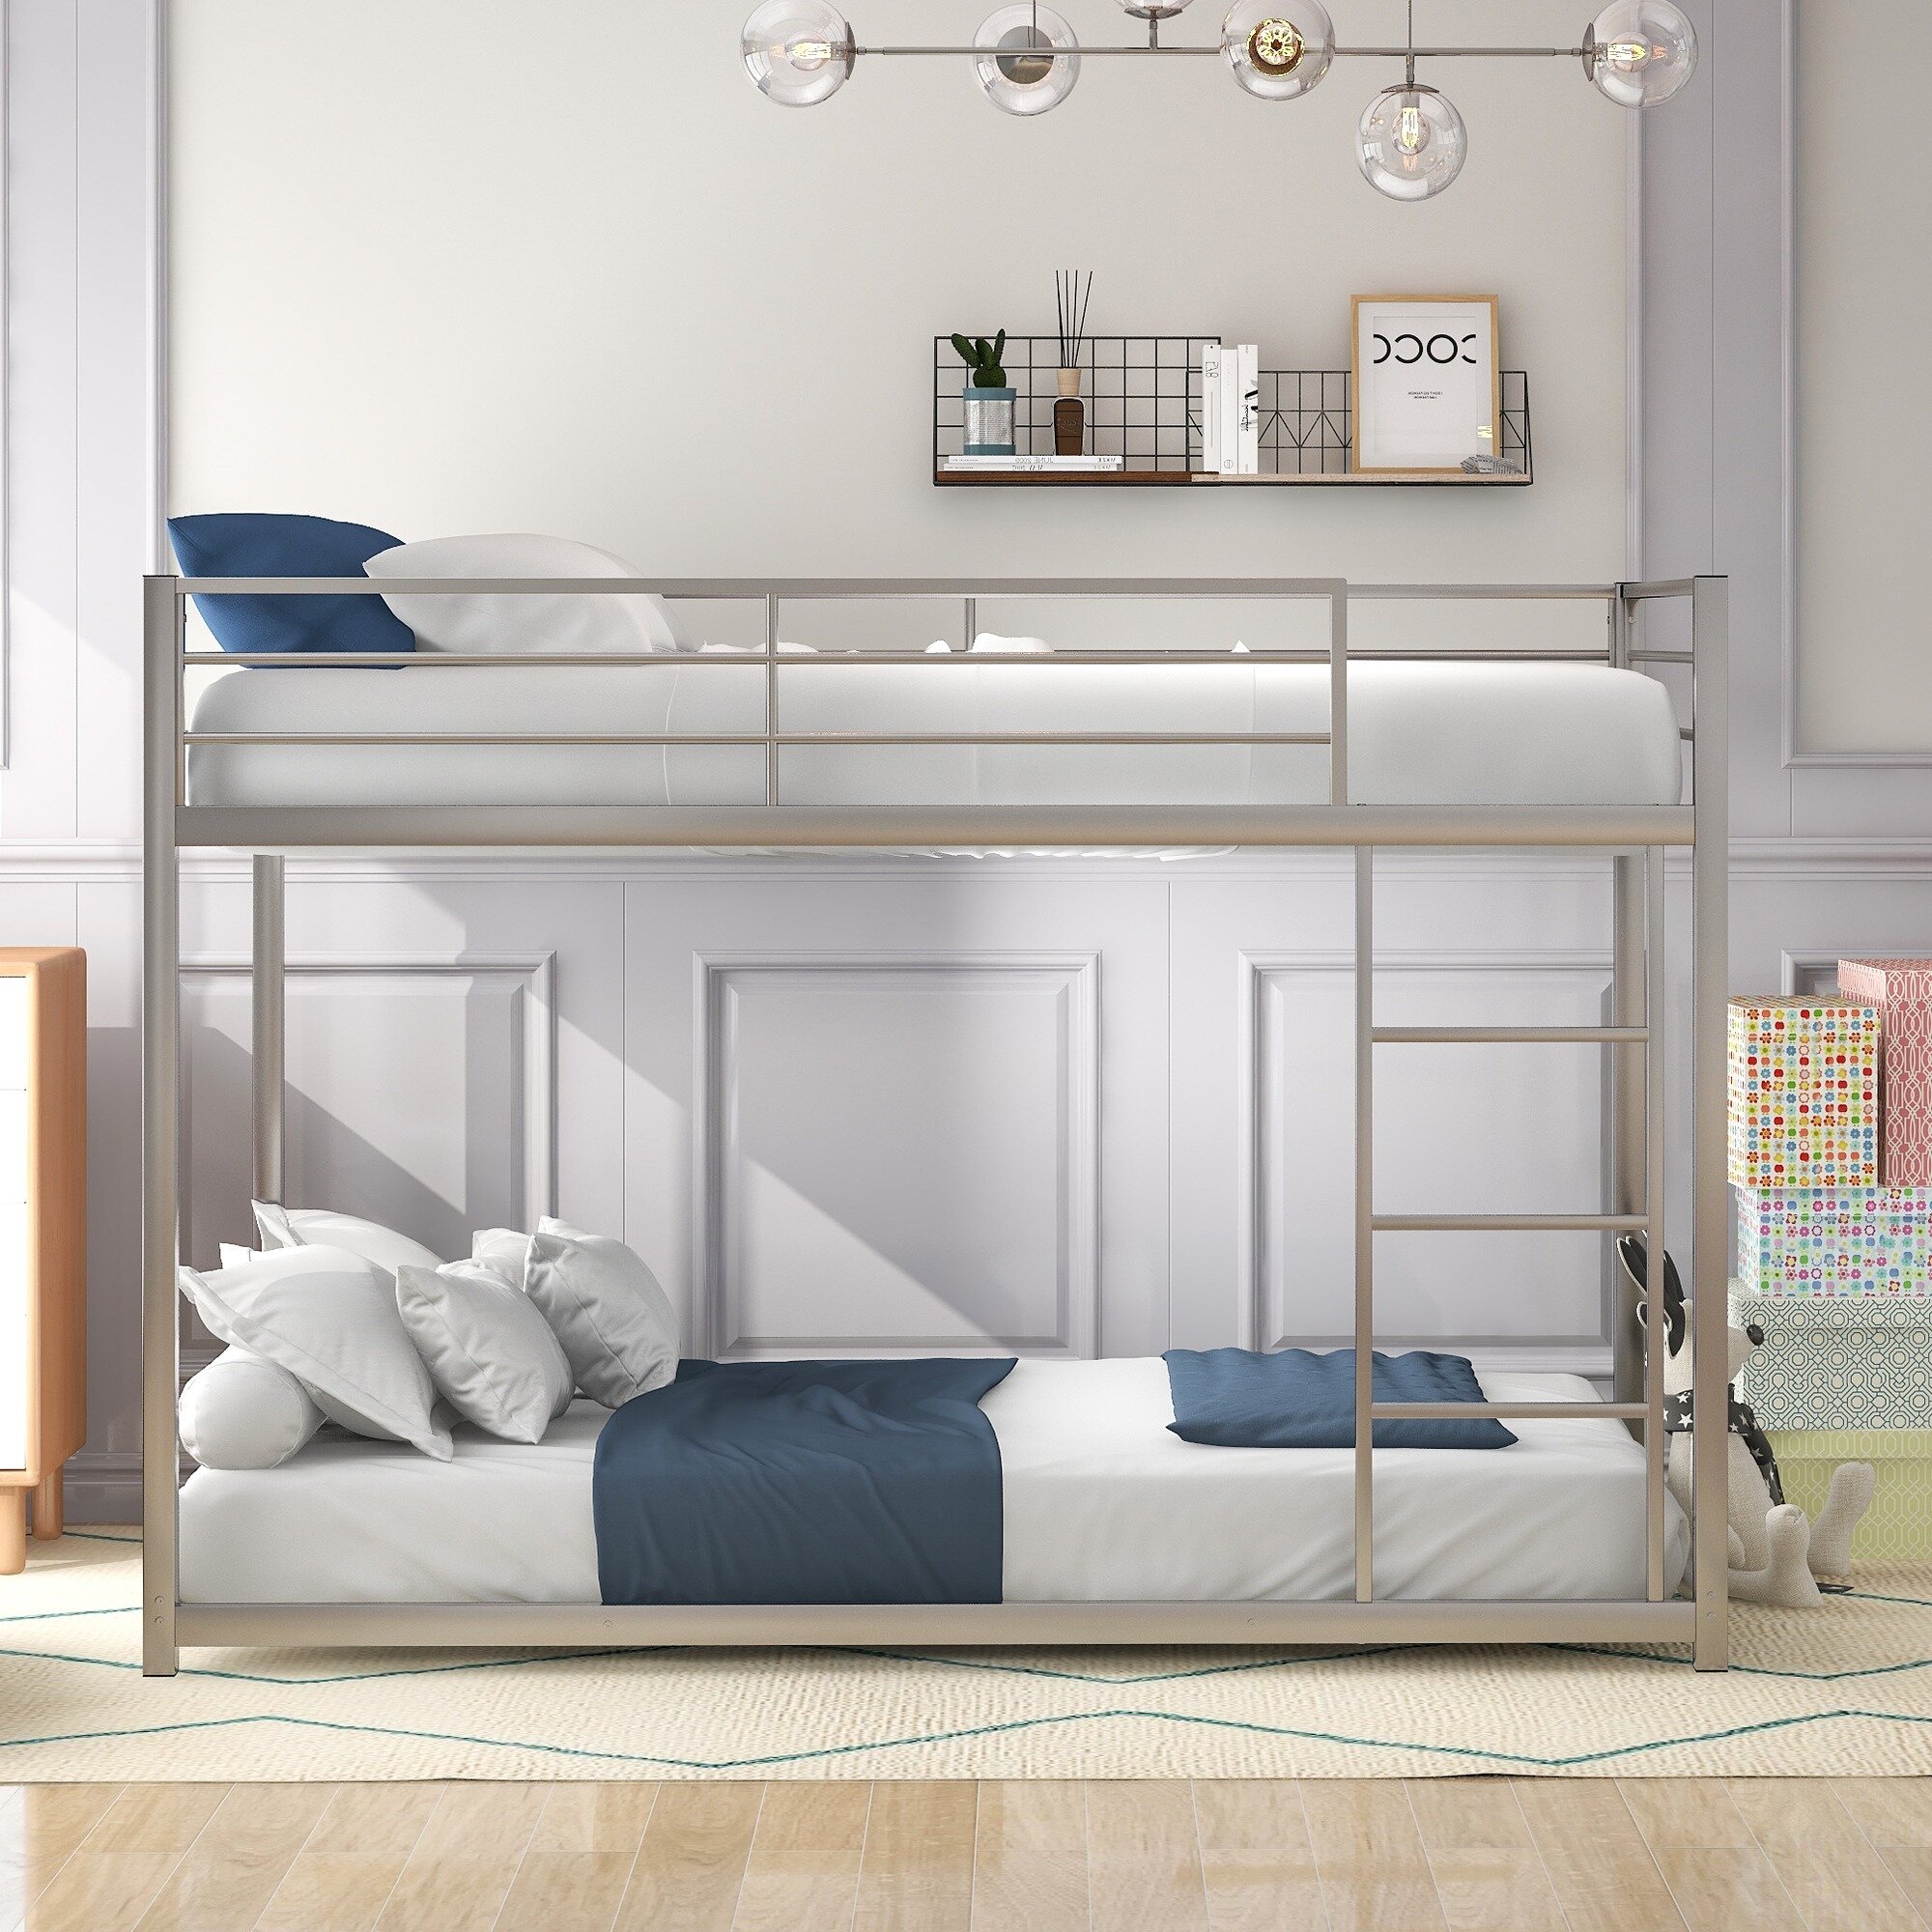 Details about   Full Over Full Size Bunk Bed Metal Beds Heavy Duty Sturdy Kids Bedroom Furniture 